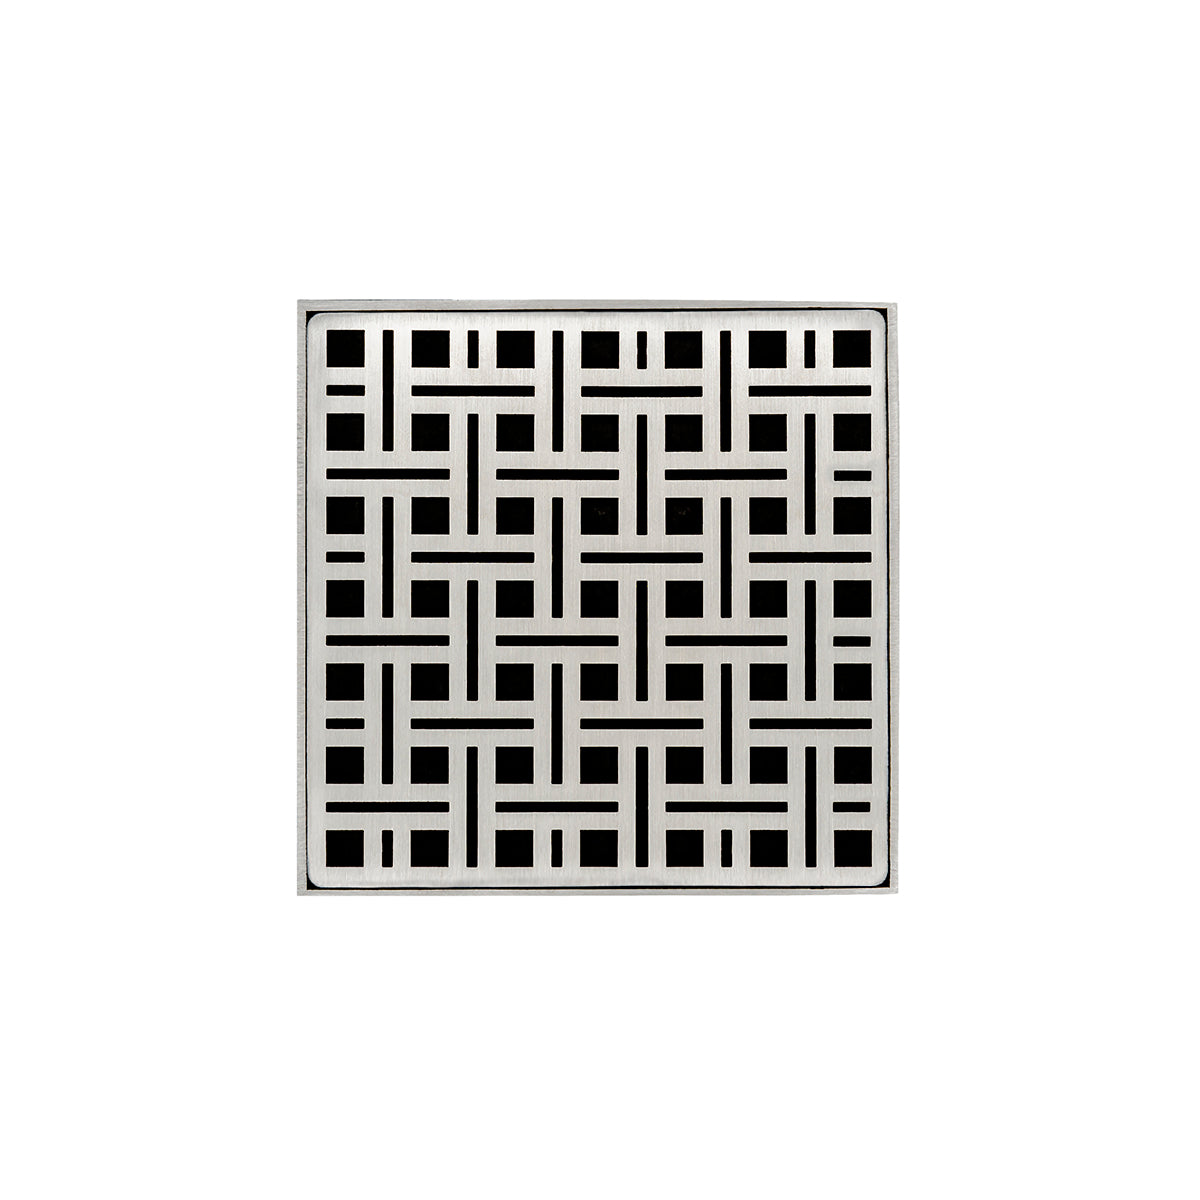 Infinity Drain 5" x 5" VD 5 Premium Center Drain Kit with Weave Pattern Decorative Plate with Cast Iron Drain Body for Hot Mop, 2" Outlet